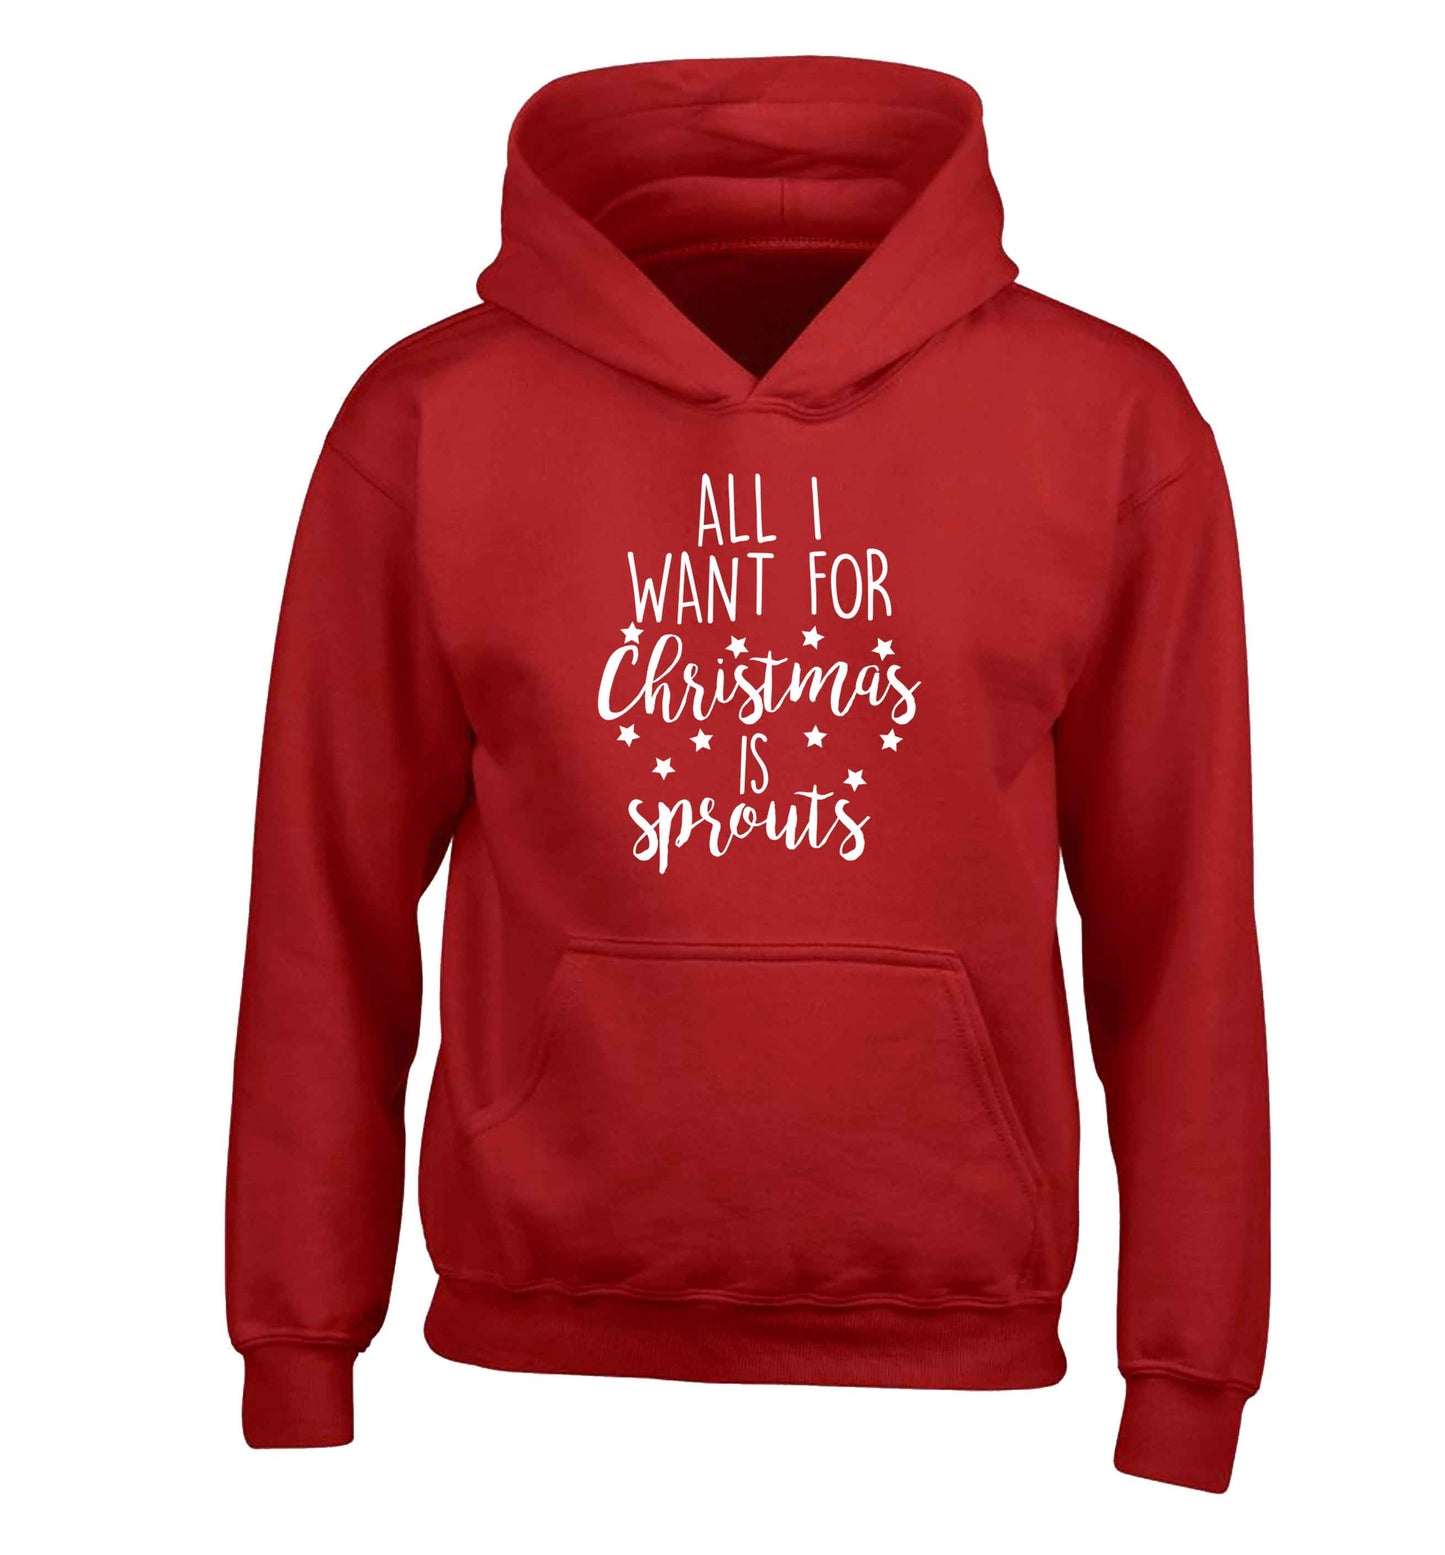 All I want for Christmas is sprouts children's red hoodie 12-13 Years